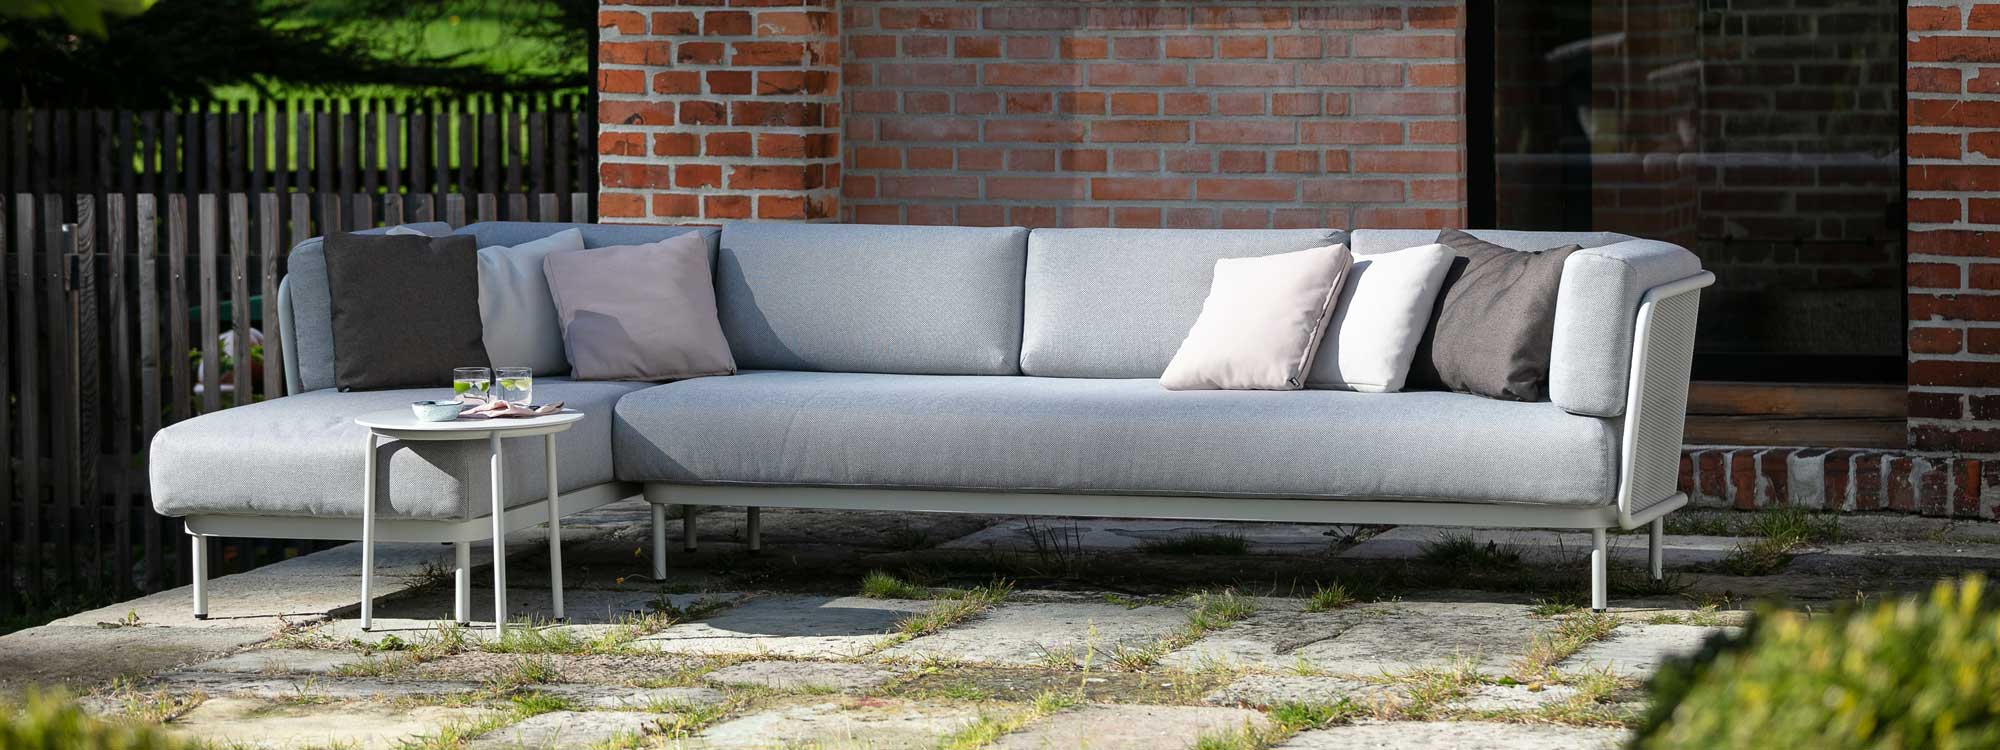 Image of Baza white garden sofa with grey cushions in flag stoned courtyard